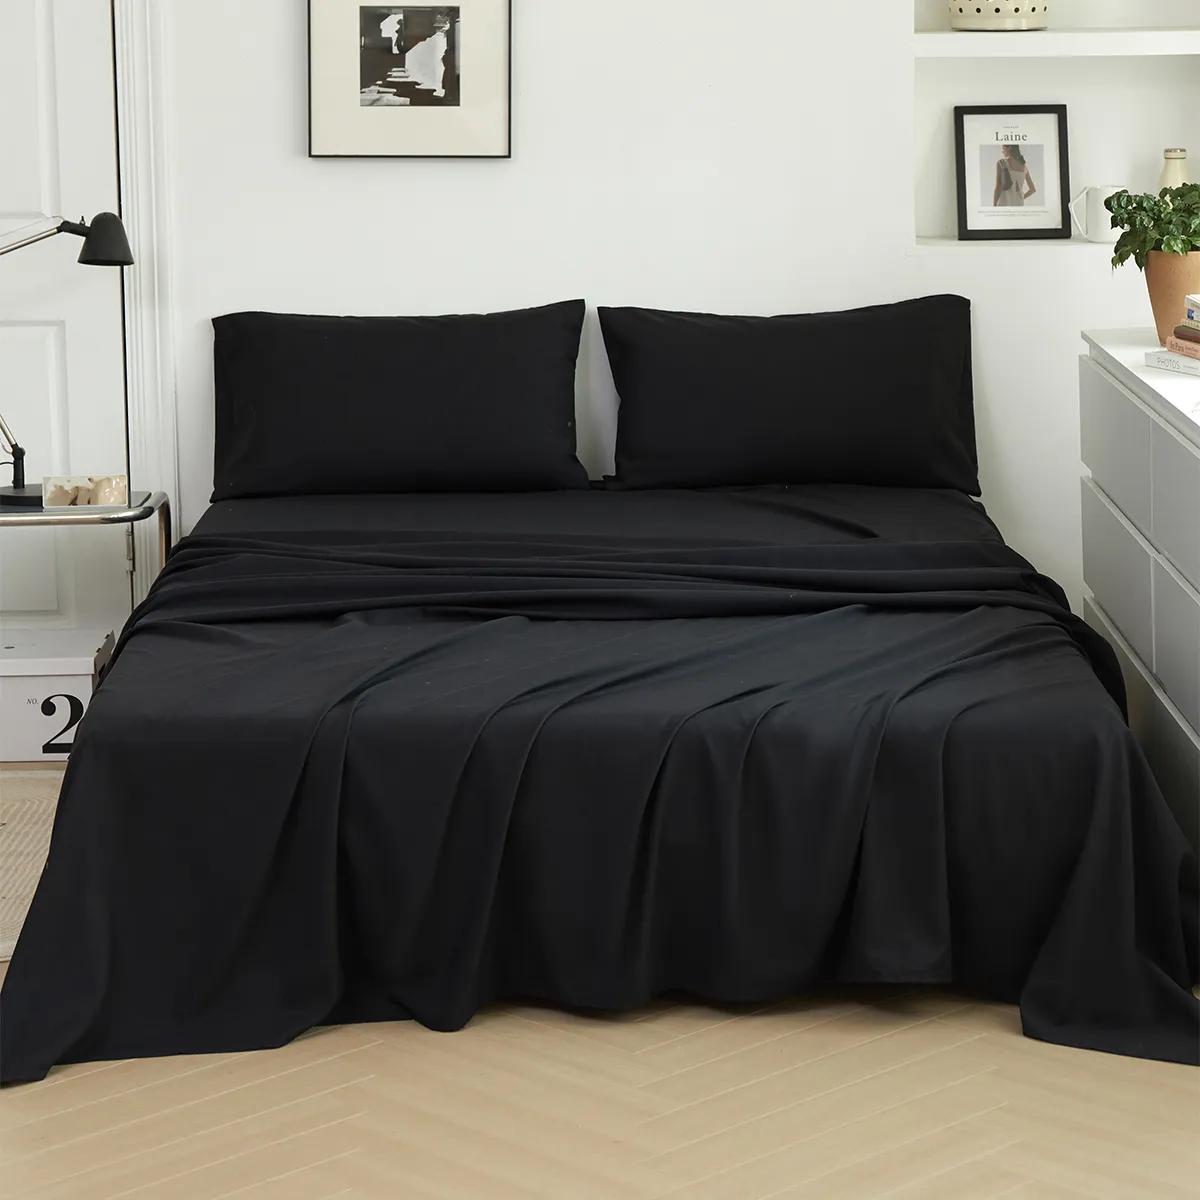 solid color bedding set: three-piece set with fitted sheet, pillowcase, and flat sheet